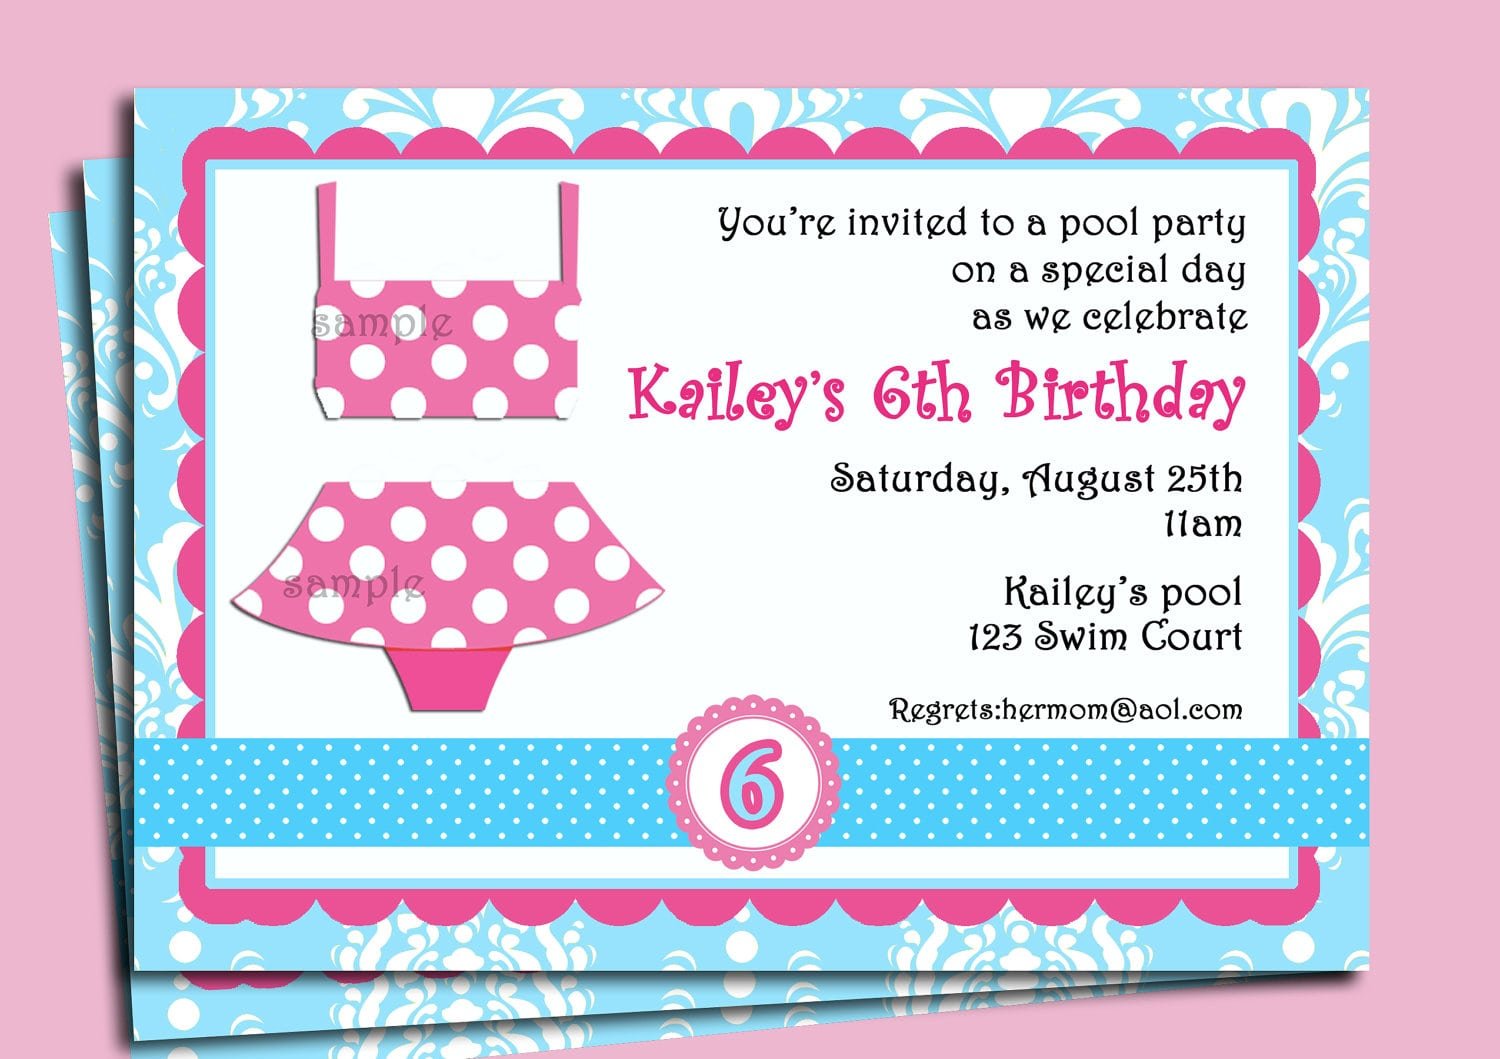 Party Invitation Samples